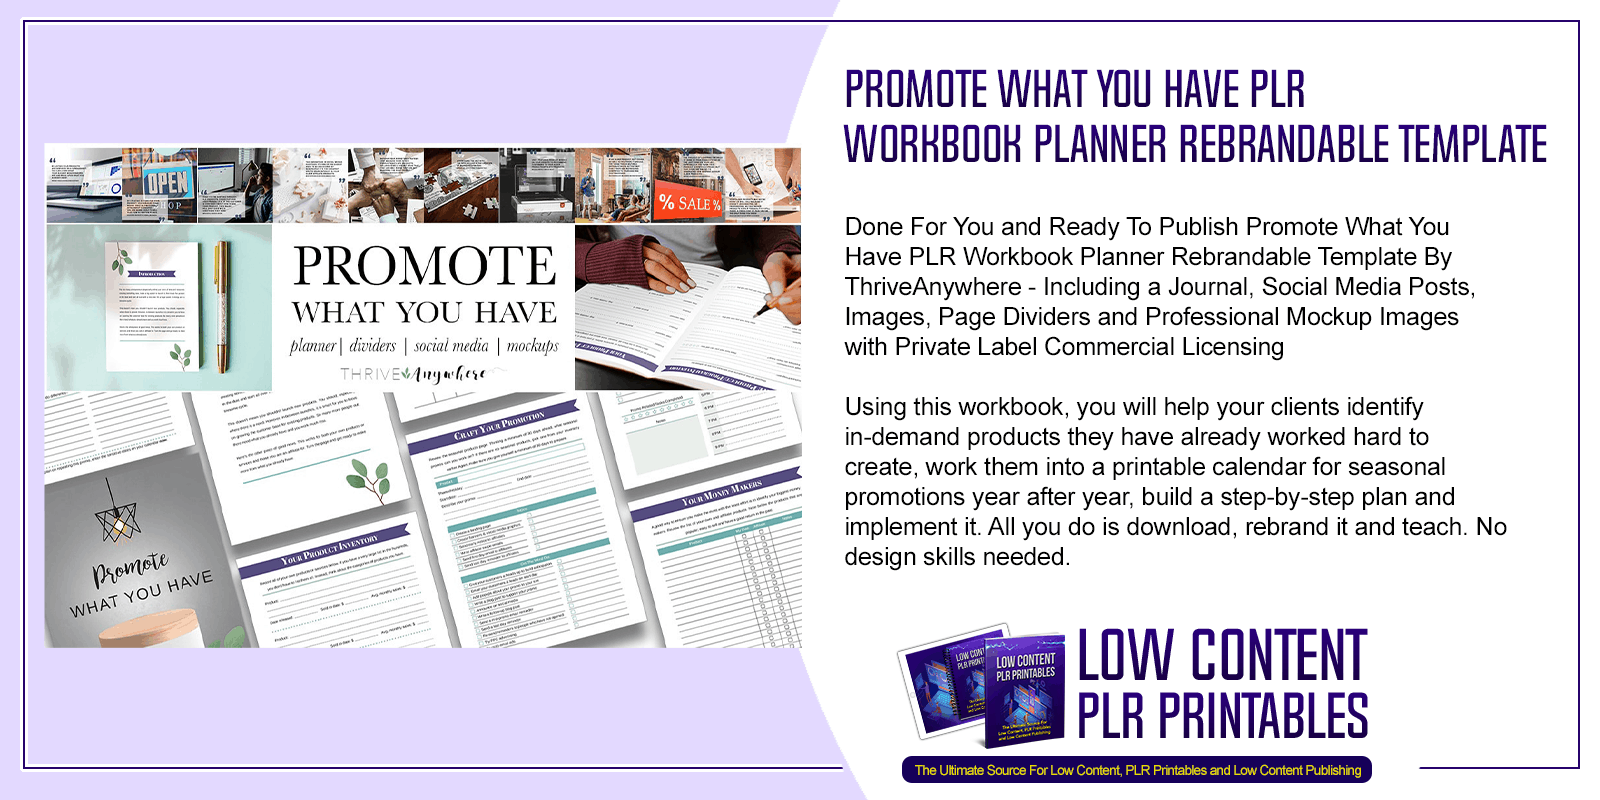 Promote What You Have PLR Workbook Planner Rebrandable Template